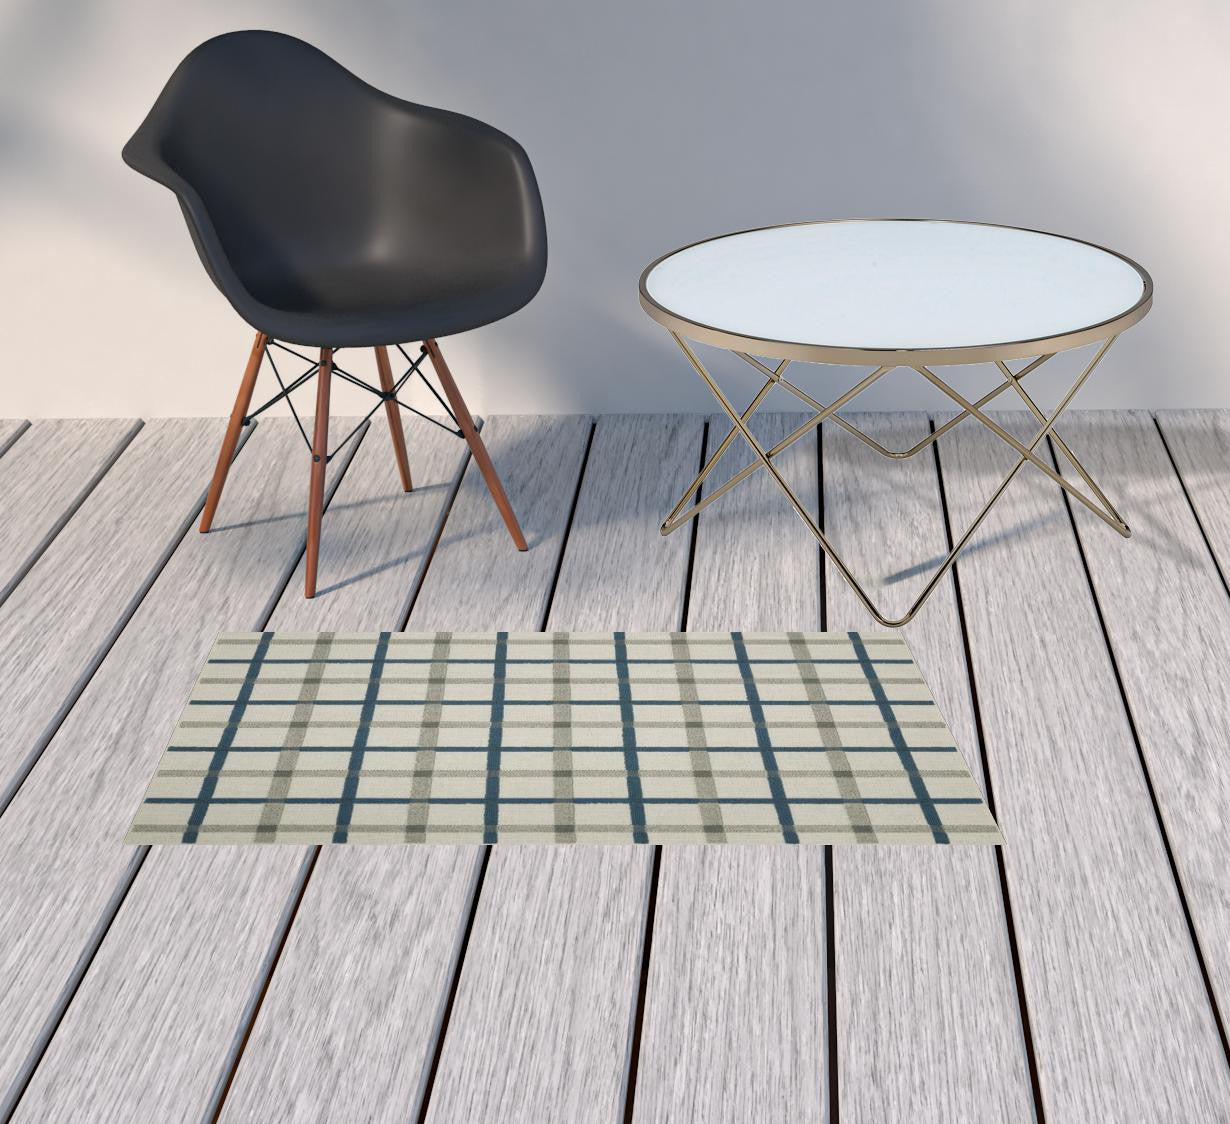 2' X 4' Blue and Beige Geometric Stain Resistant Indoor Outdoor Area Rug